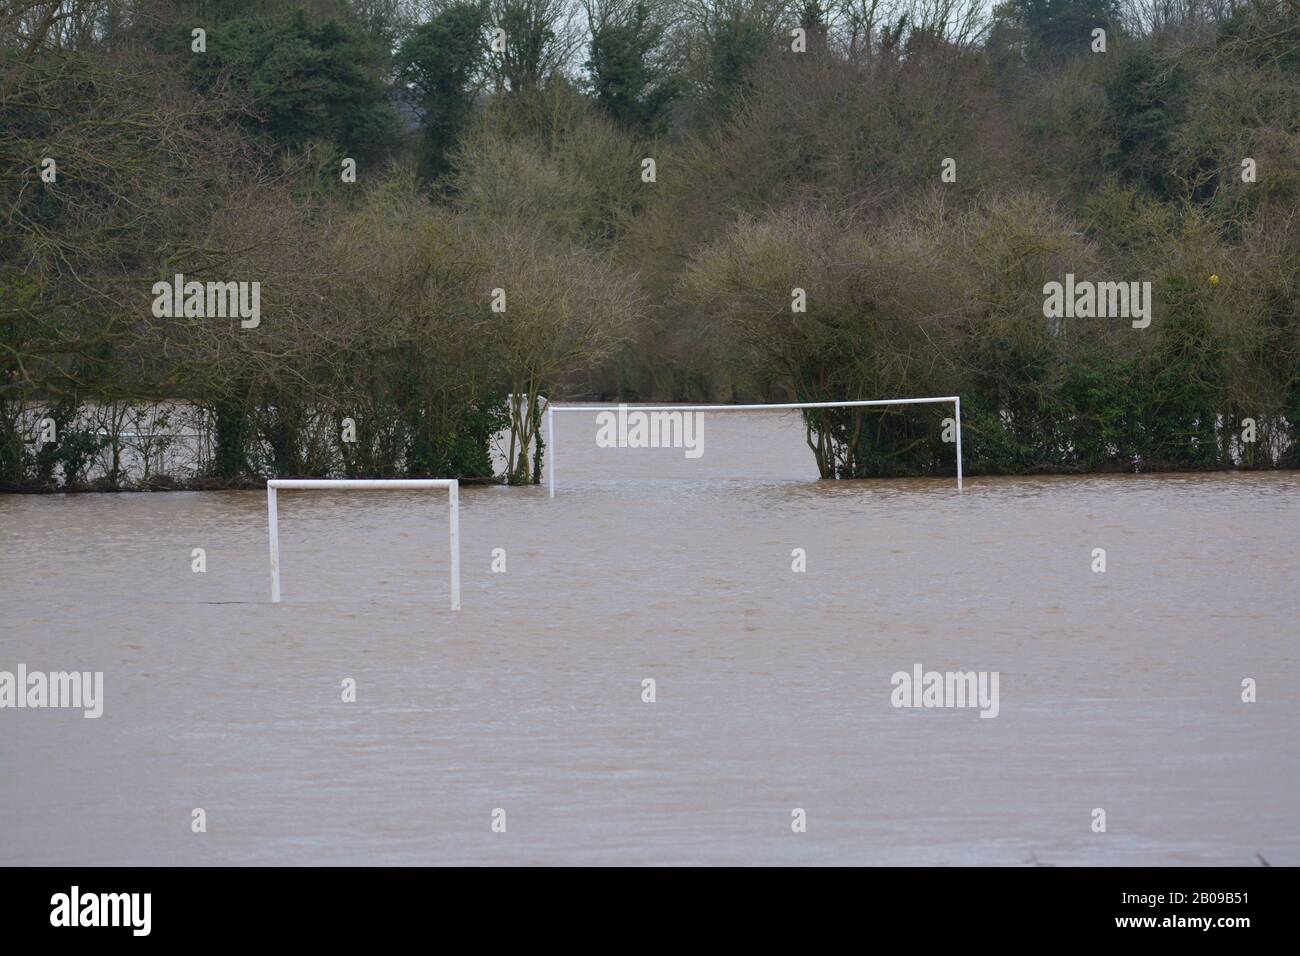 River Wye burst its banks at Ross-on-Wye Herefordshire UK with water covering playing fields football pitch re flooding global warming climate Stock Photo